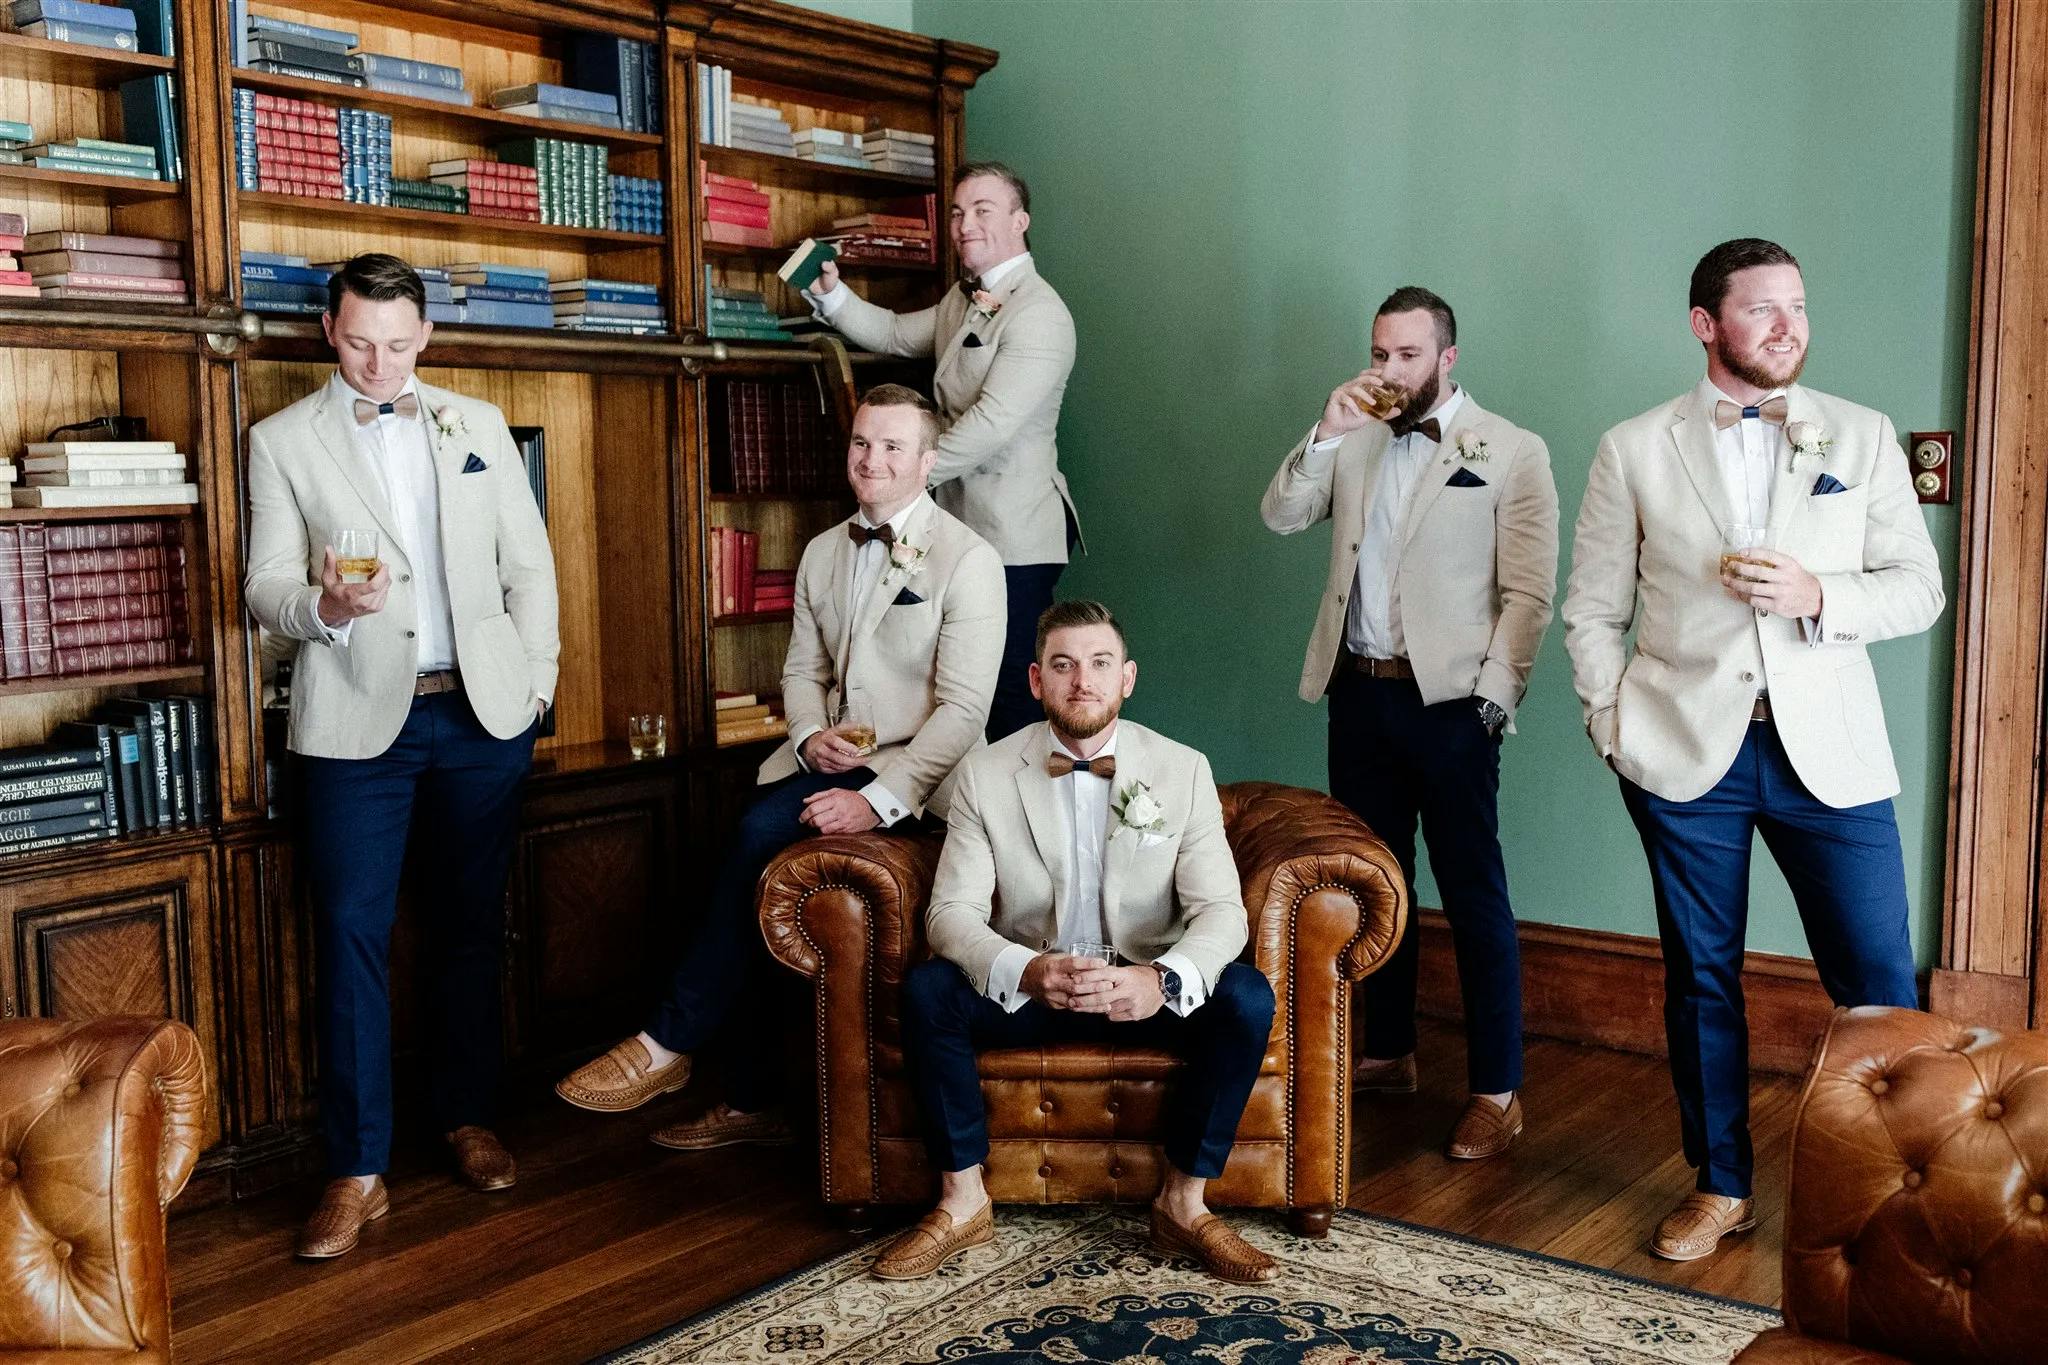 Six groomsmen in beige jackets and dark trousers pose in a vintage-style library with wooden shelves and books. Some are holding drinks, and two are sitting on a leather armchair and its armrest, creating a relaxed yet elegant atmosphere.